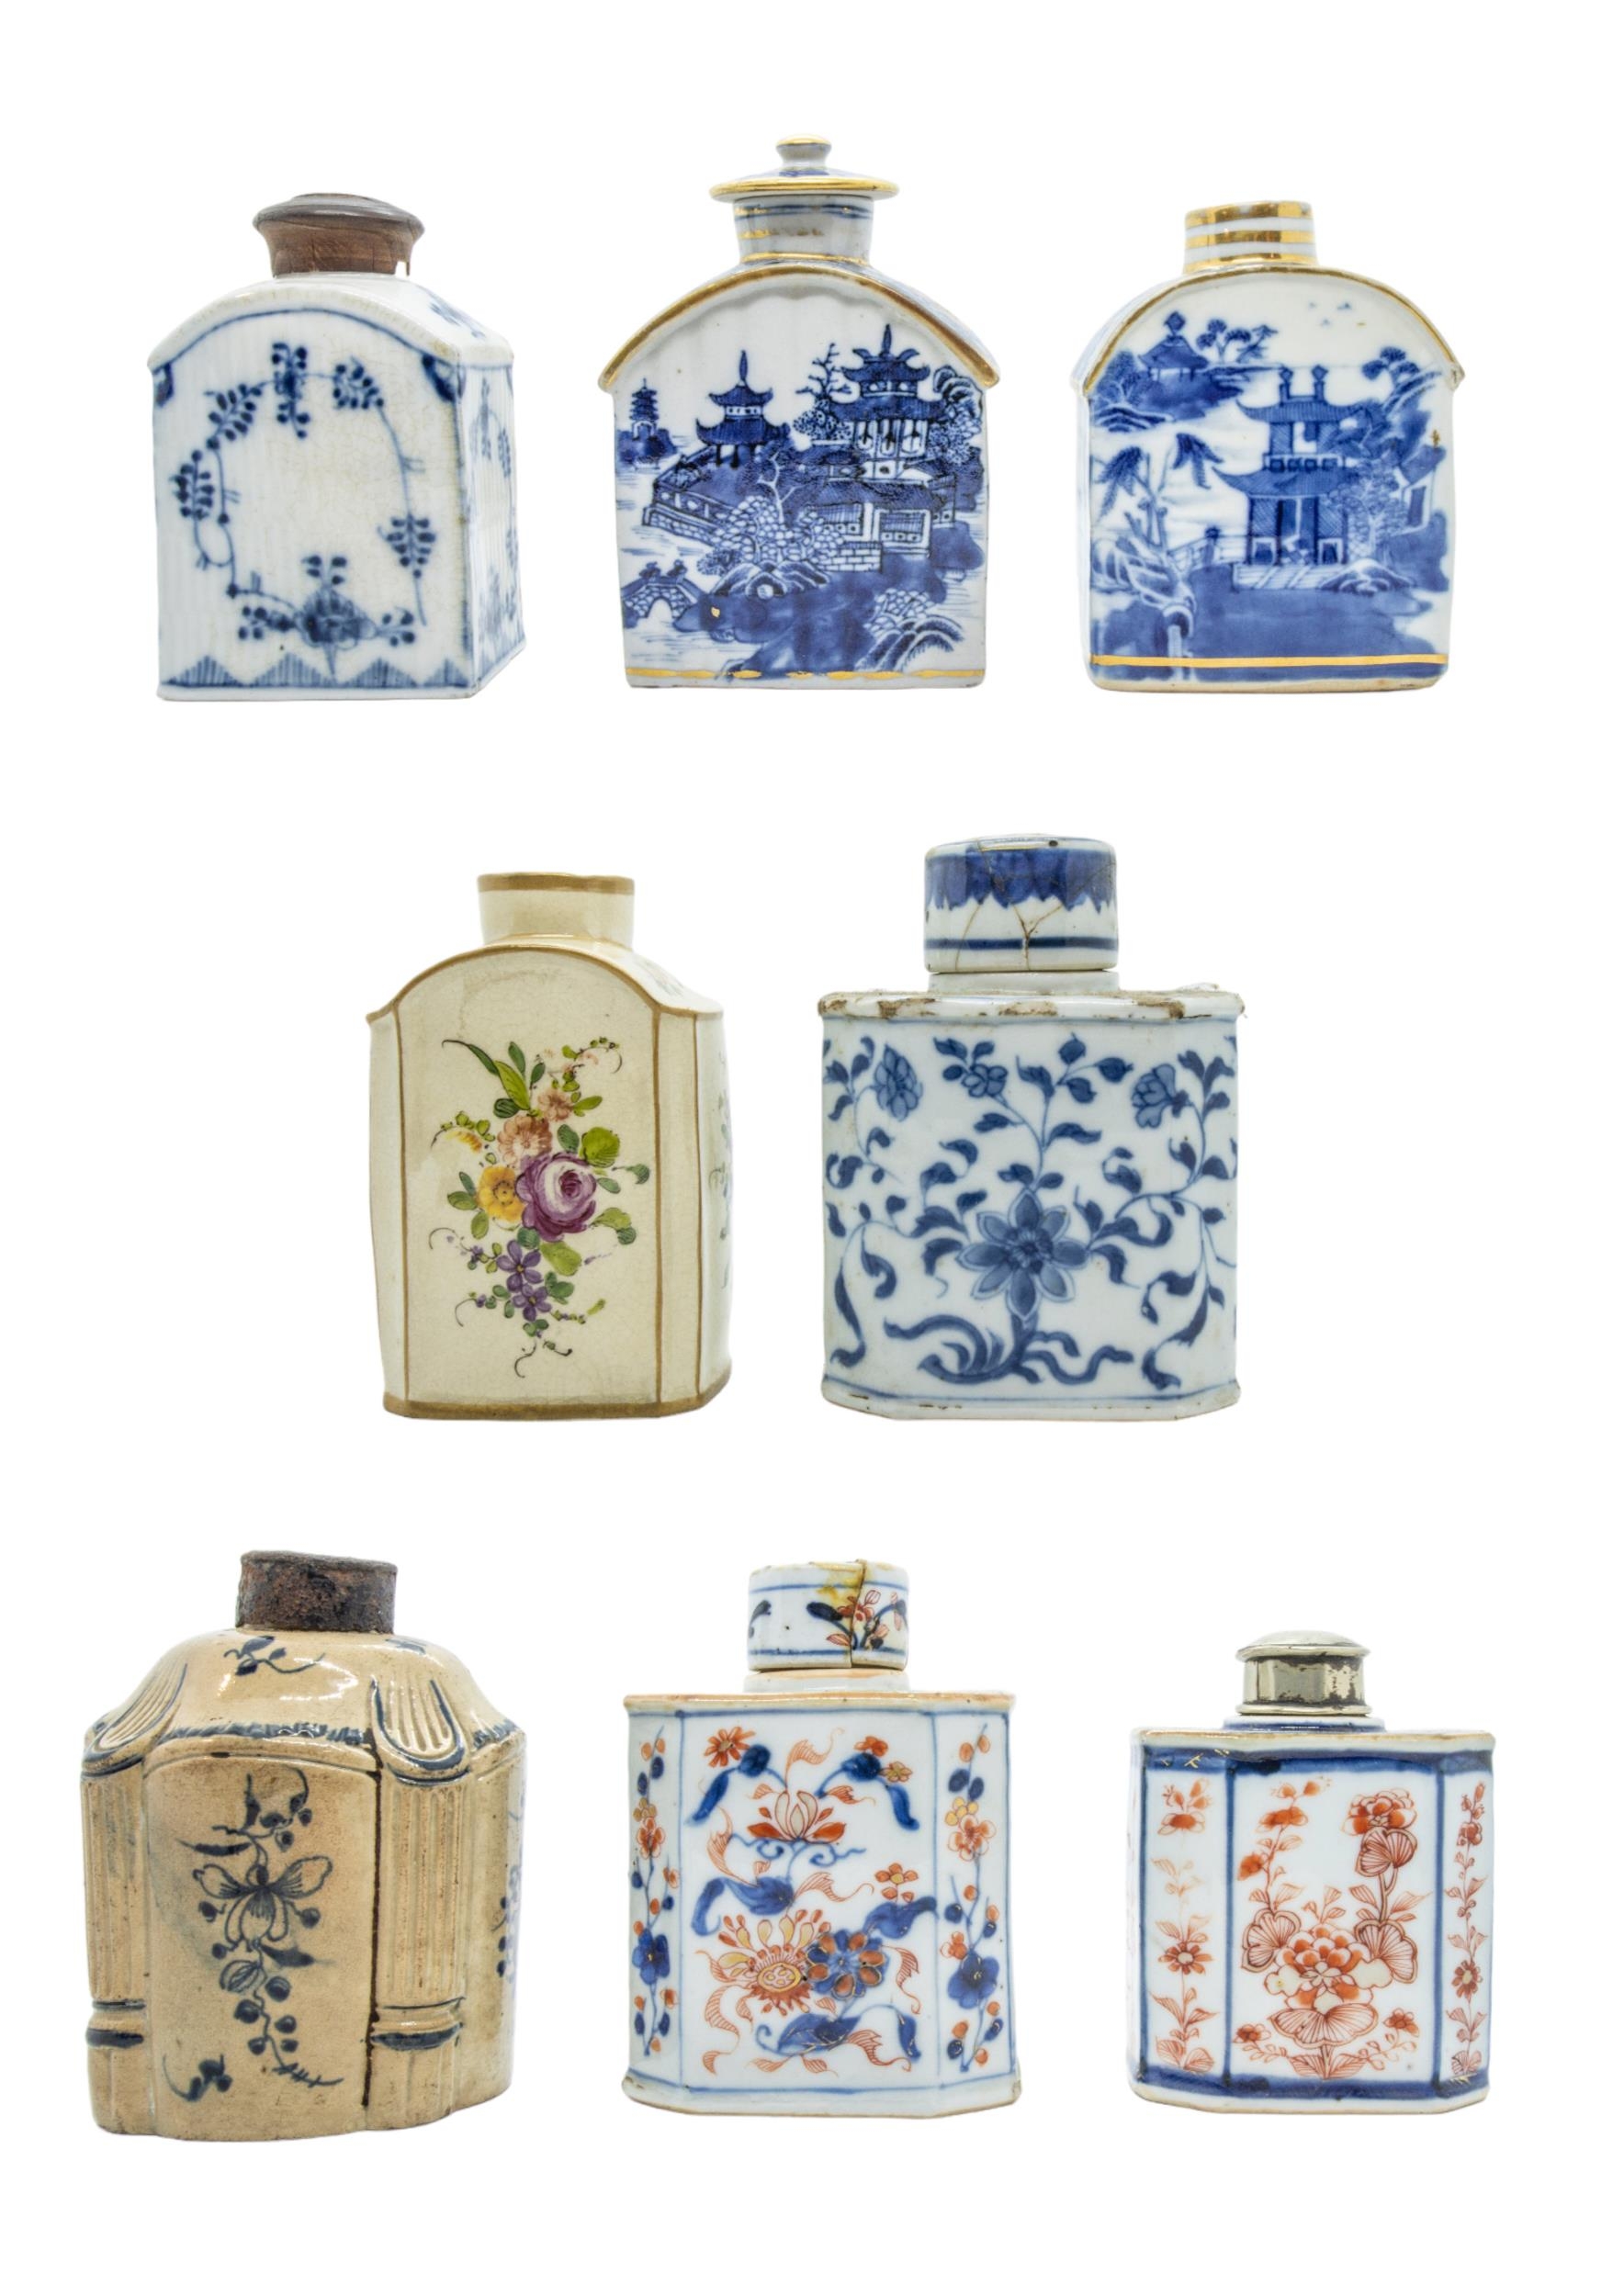 A MIXED GROUP OF EIGHT PORCELAIN TEA CADDIES, 18TH/19TH CENTURY, including two Imari pattern